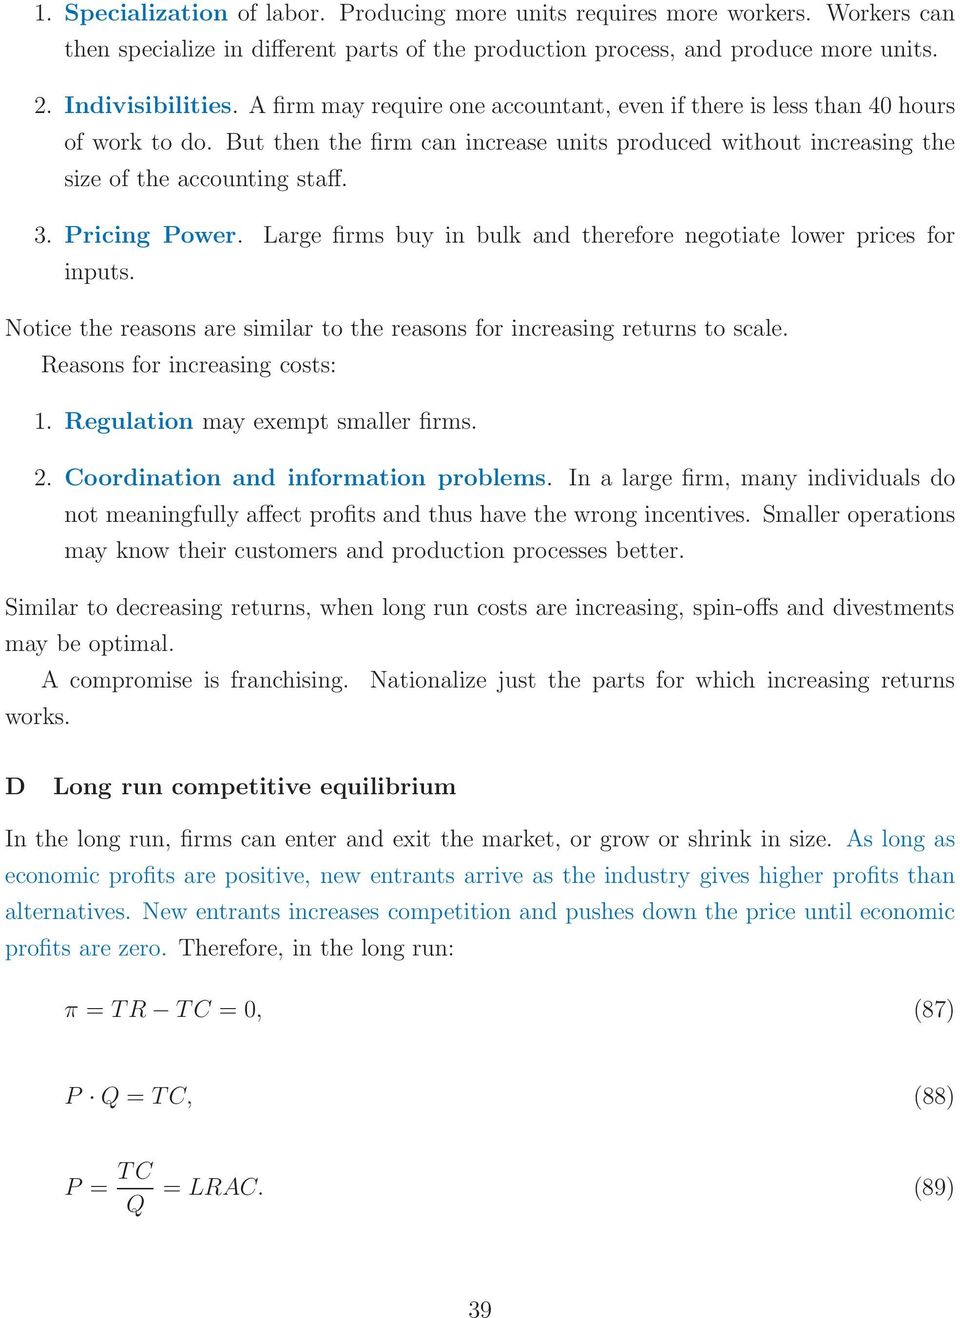 Pricing Power. Large firms buy in bulk and therefore negotiate lower prices for inputs. Notice the reasons are similar to the reasons for increasing returns to scale. Reasons for increasing costs: 1.